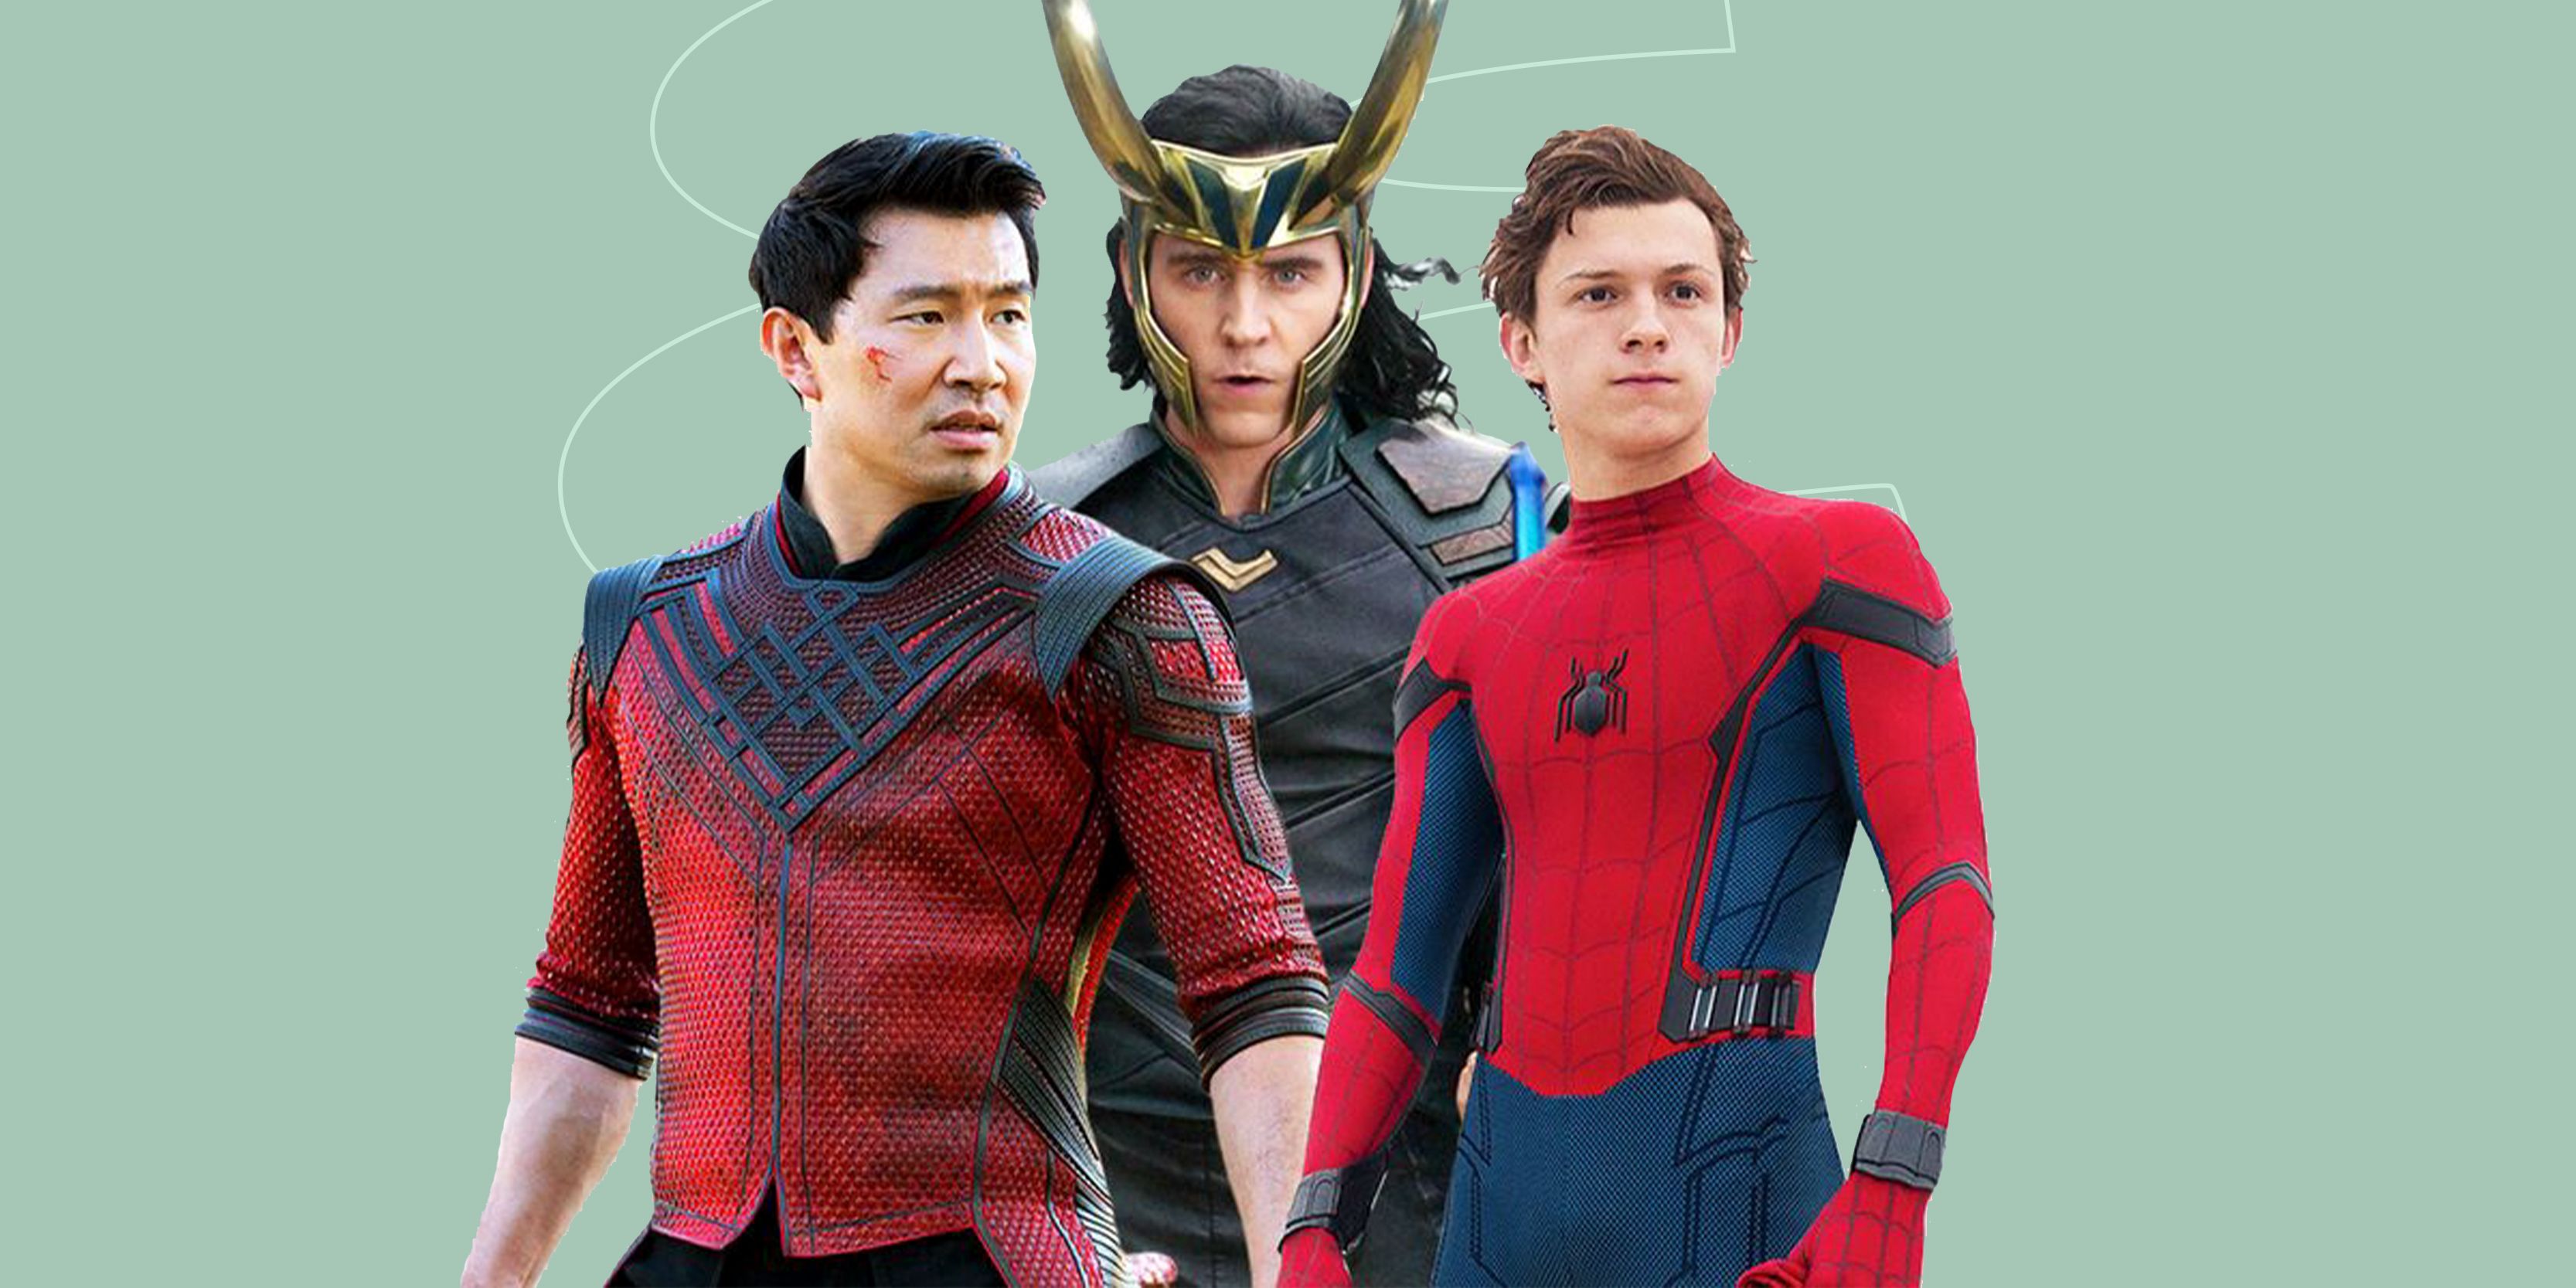 What you need to know before watching 'The Marvels